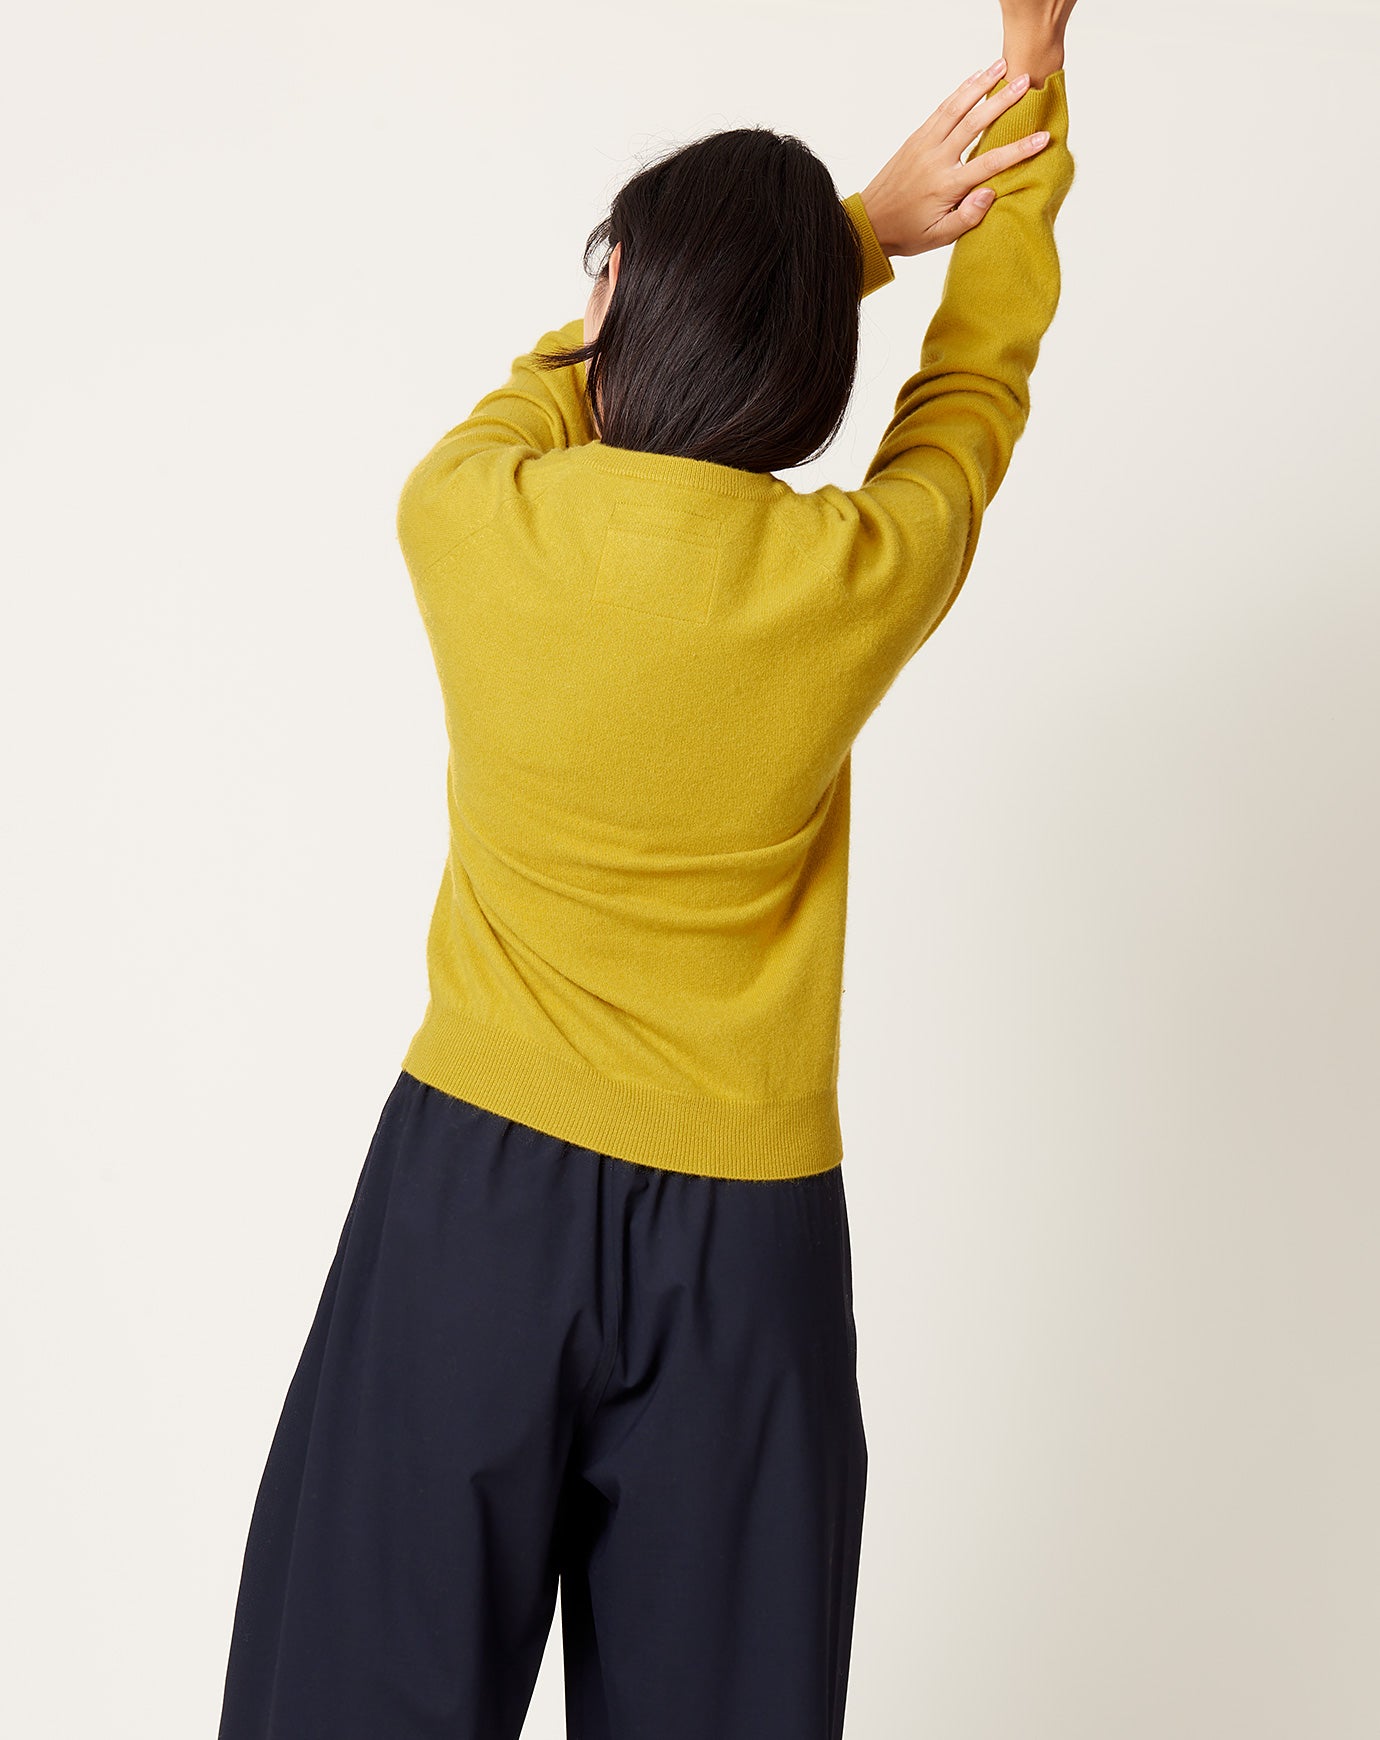 Frenckenberger Mini R Neck Sweater in Yellow